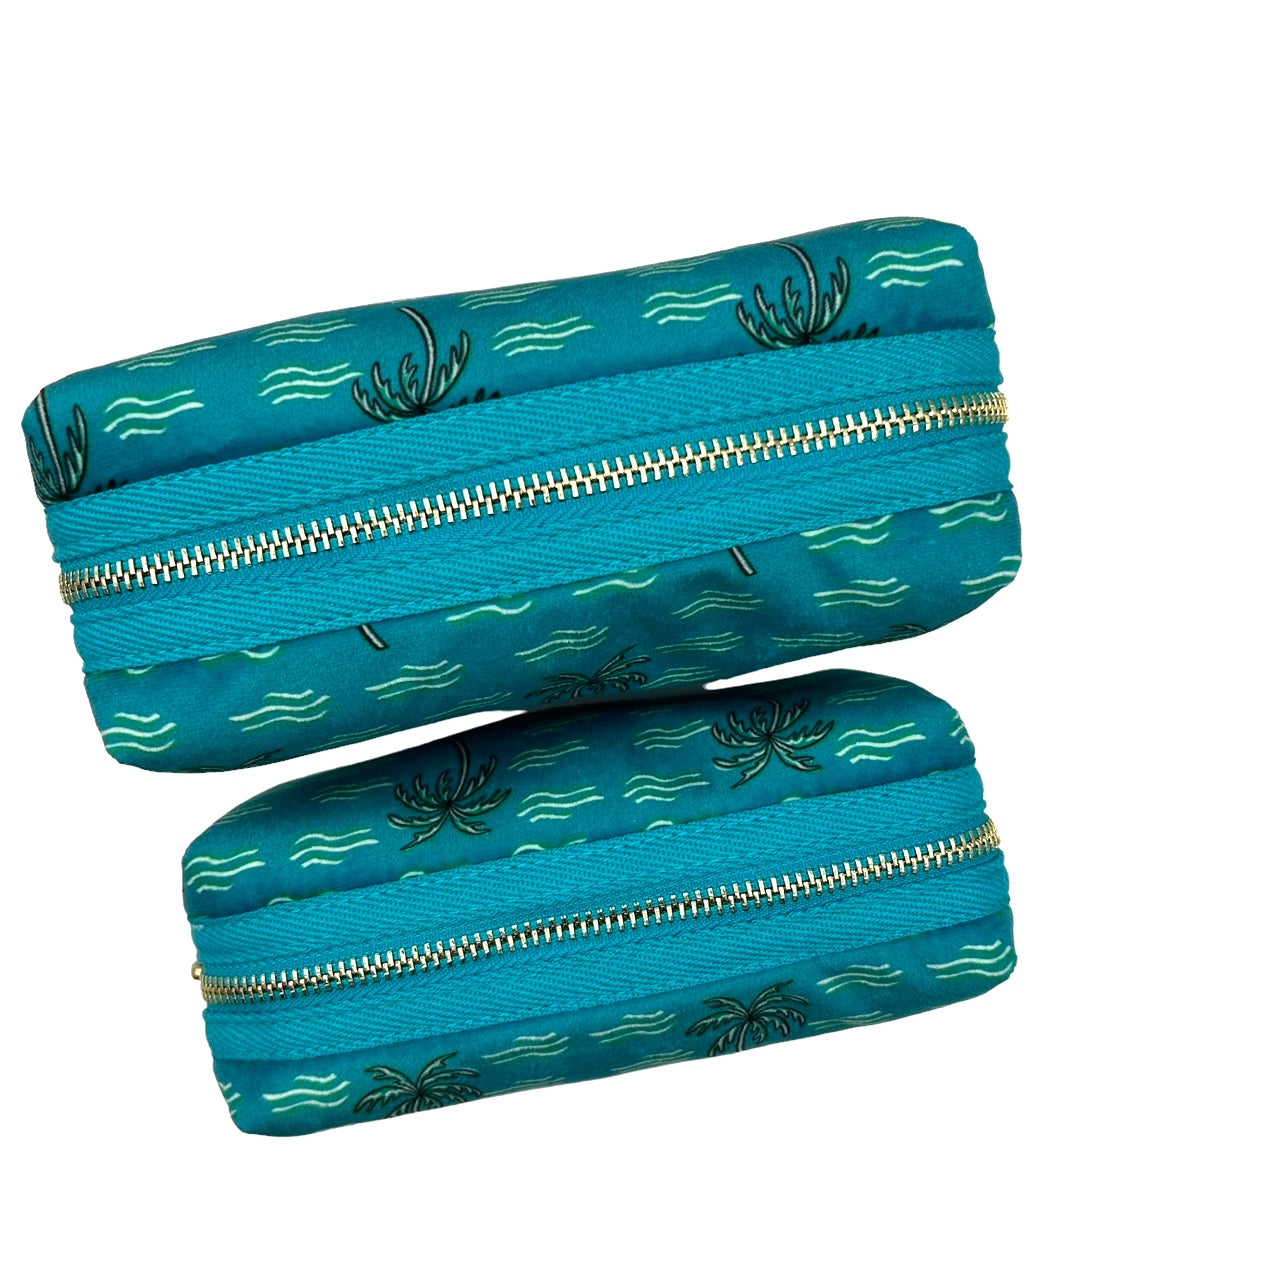 Teal palm large make-up bag & tiger brooch - recycled velvet, large and small